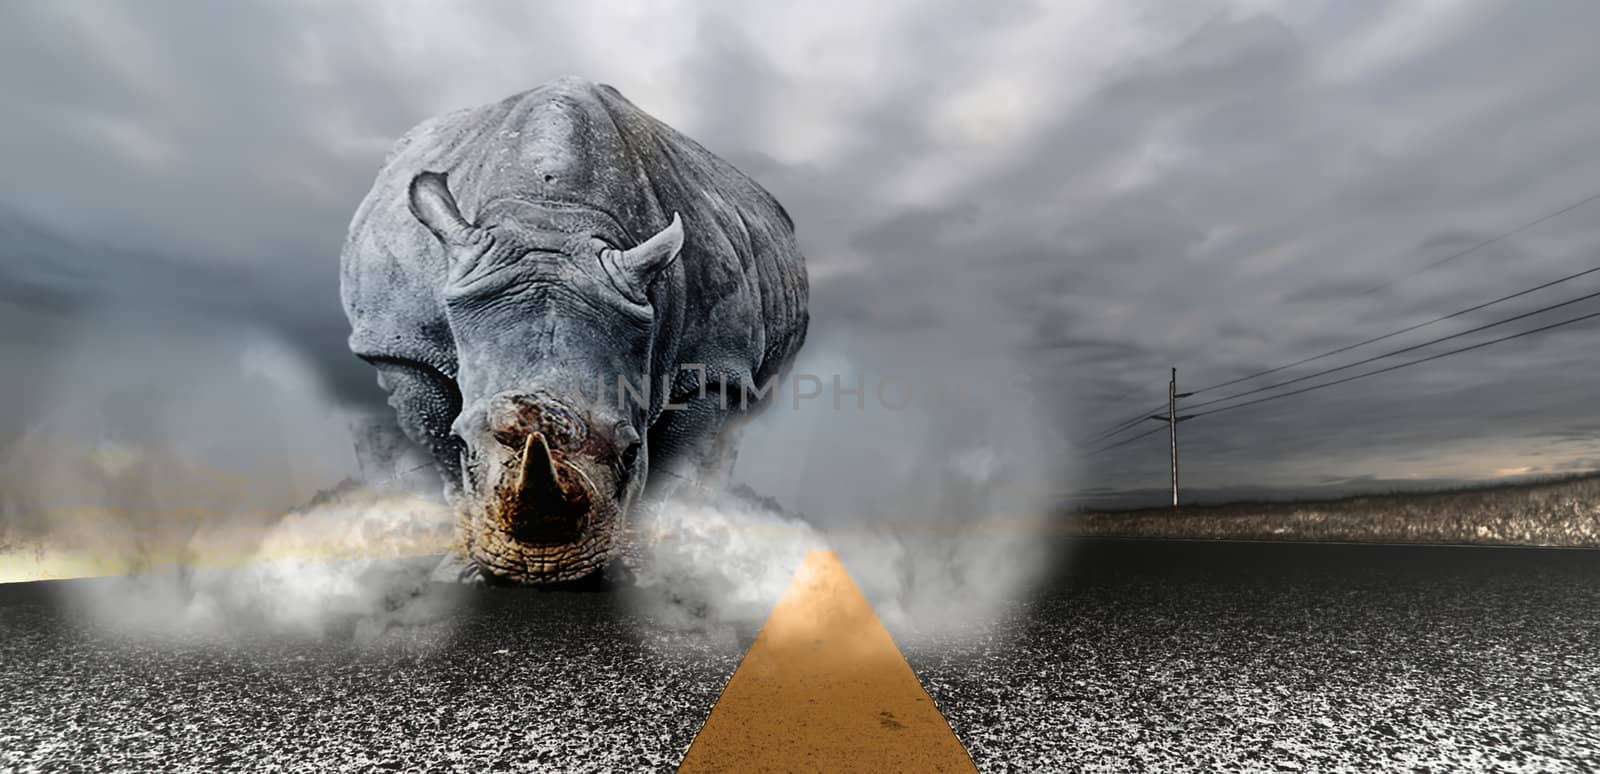 chaos look at rhino standing infront of you on the road beathing steam